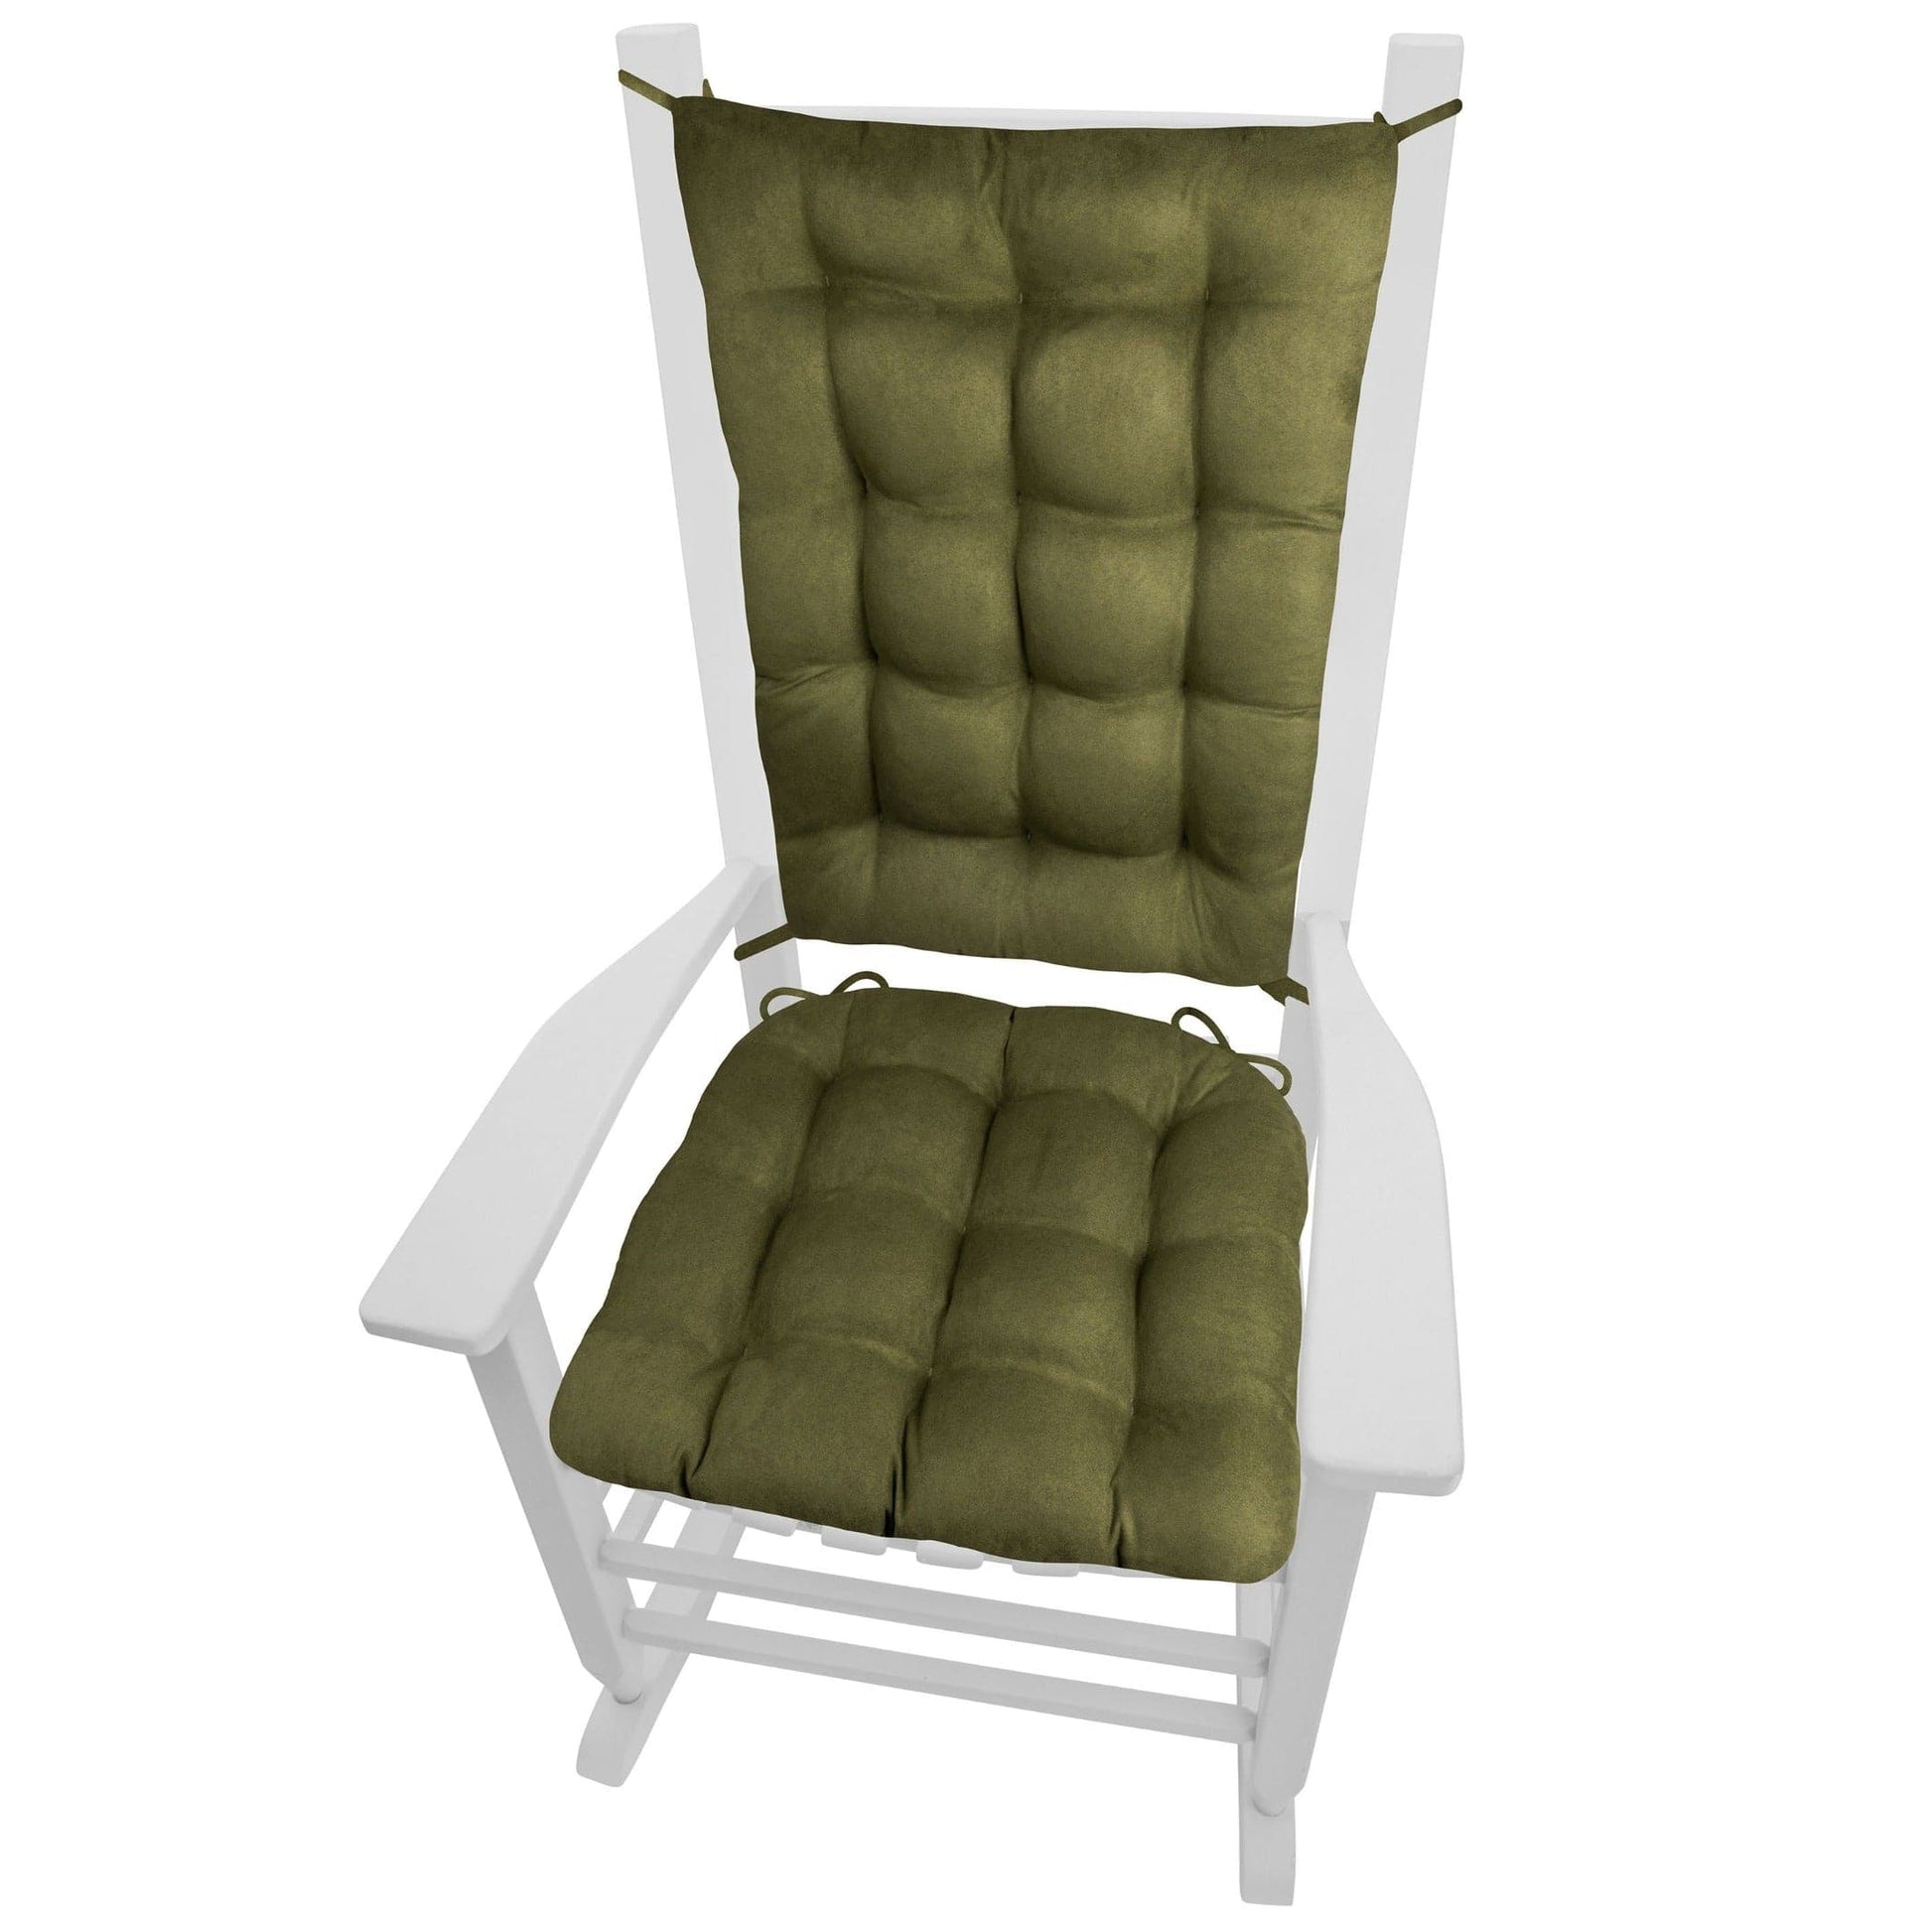 Micro-Suede Laurel Green Dining Chair Pads - Latex Foam Fill